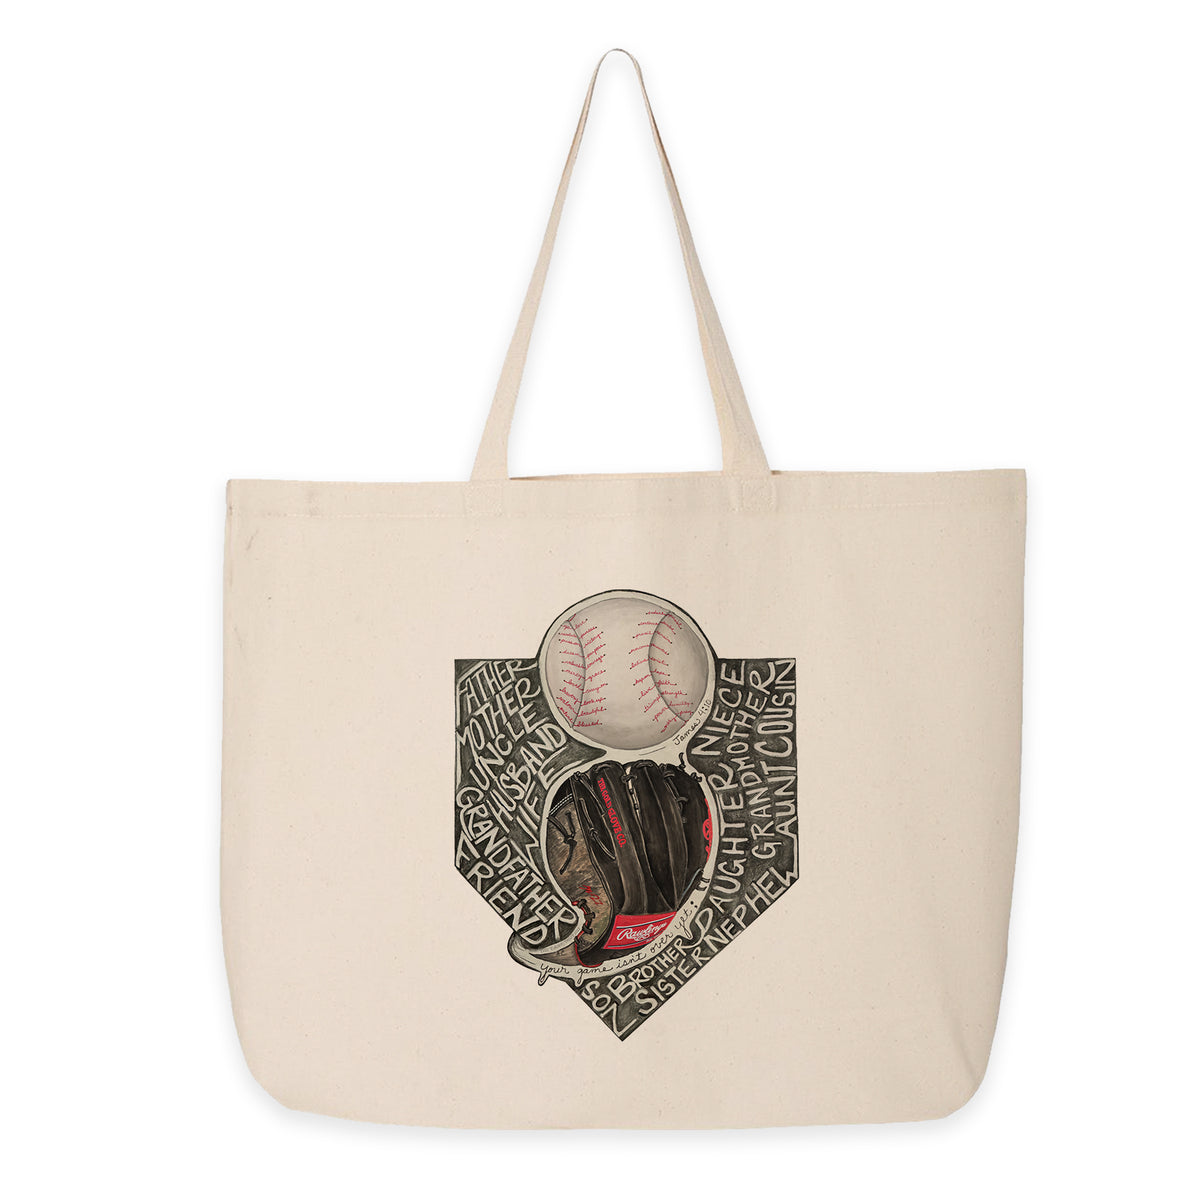 Your Game Isn't Over Yet; Canvas Tote Bag